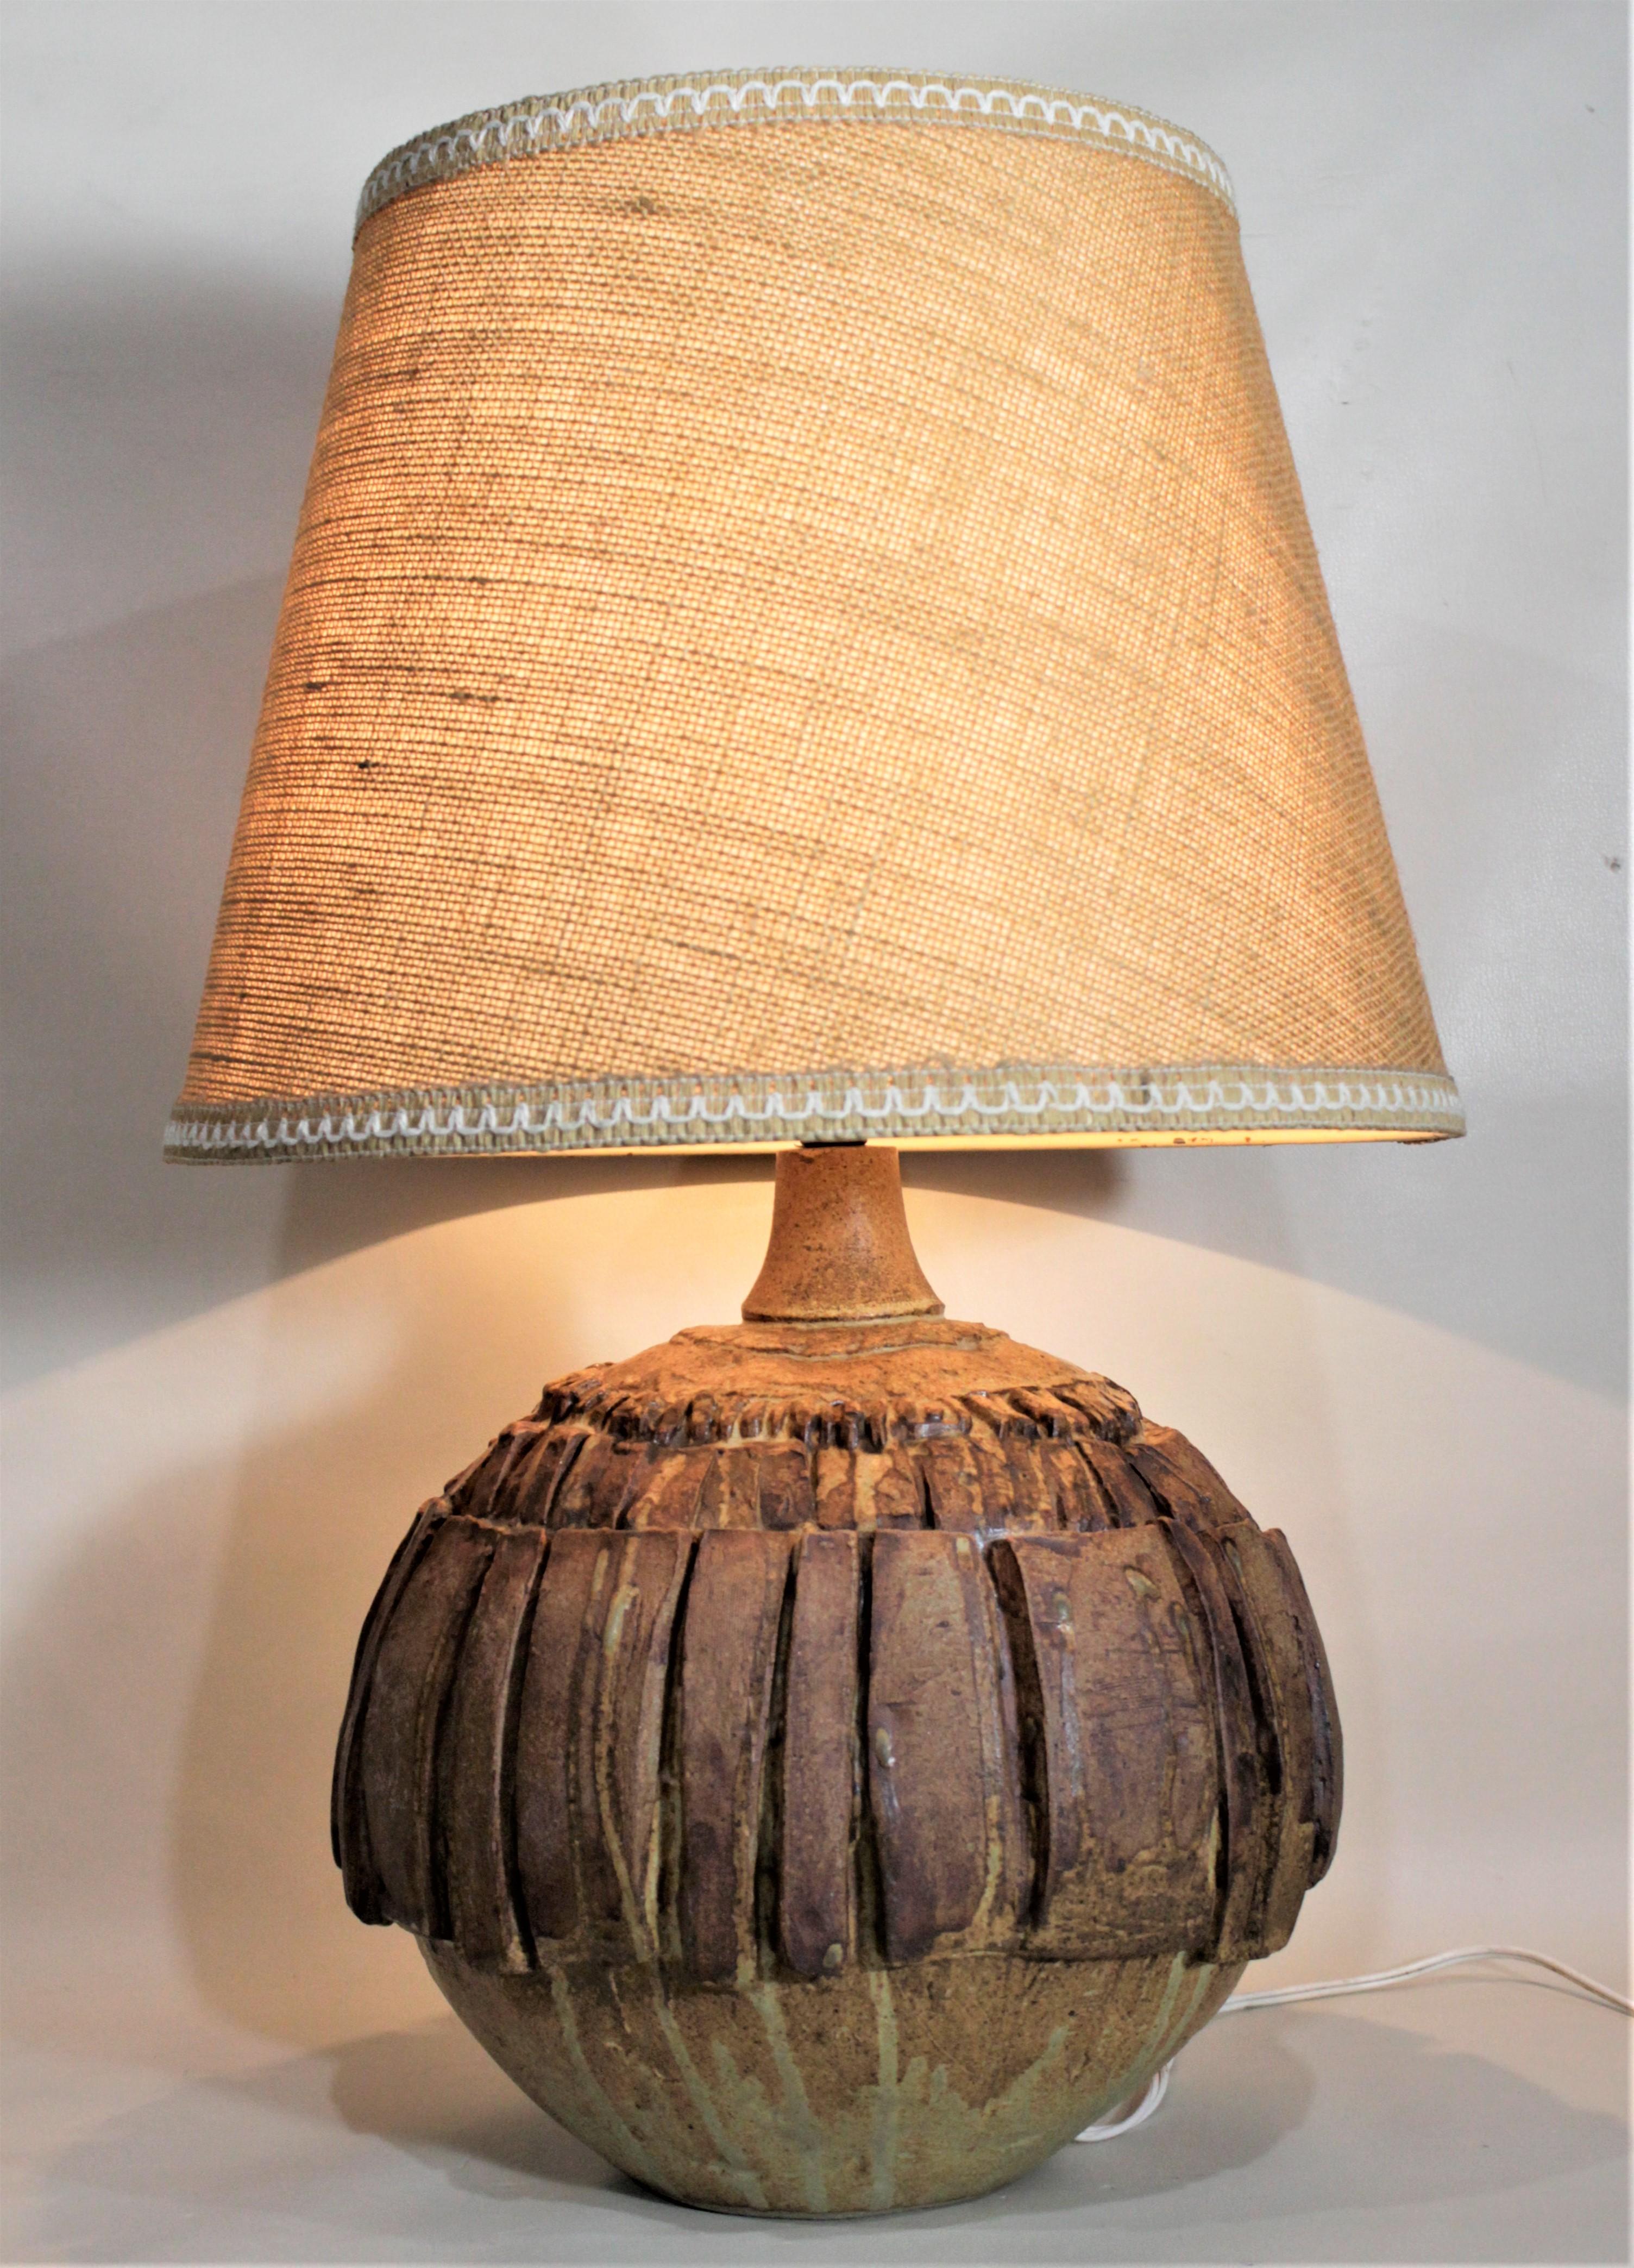 This large and substantial art pottery table lamp was made by Bernard Rooke in England in circa 1965 in the period and style of Mid-Century Modernism. The base of the lamp is done in a brutalistic style using three rows of graduated rough pottery